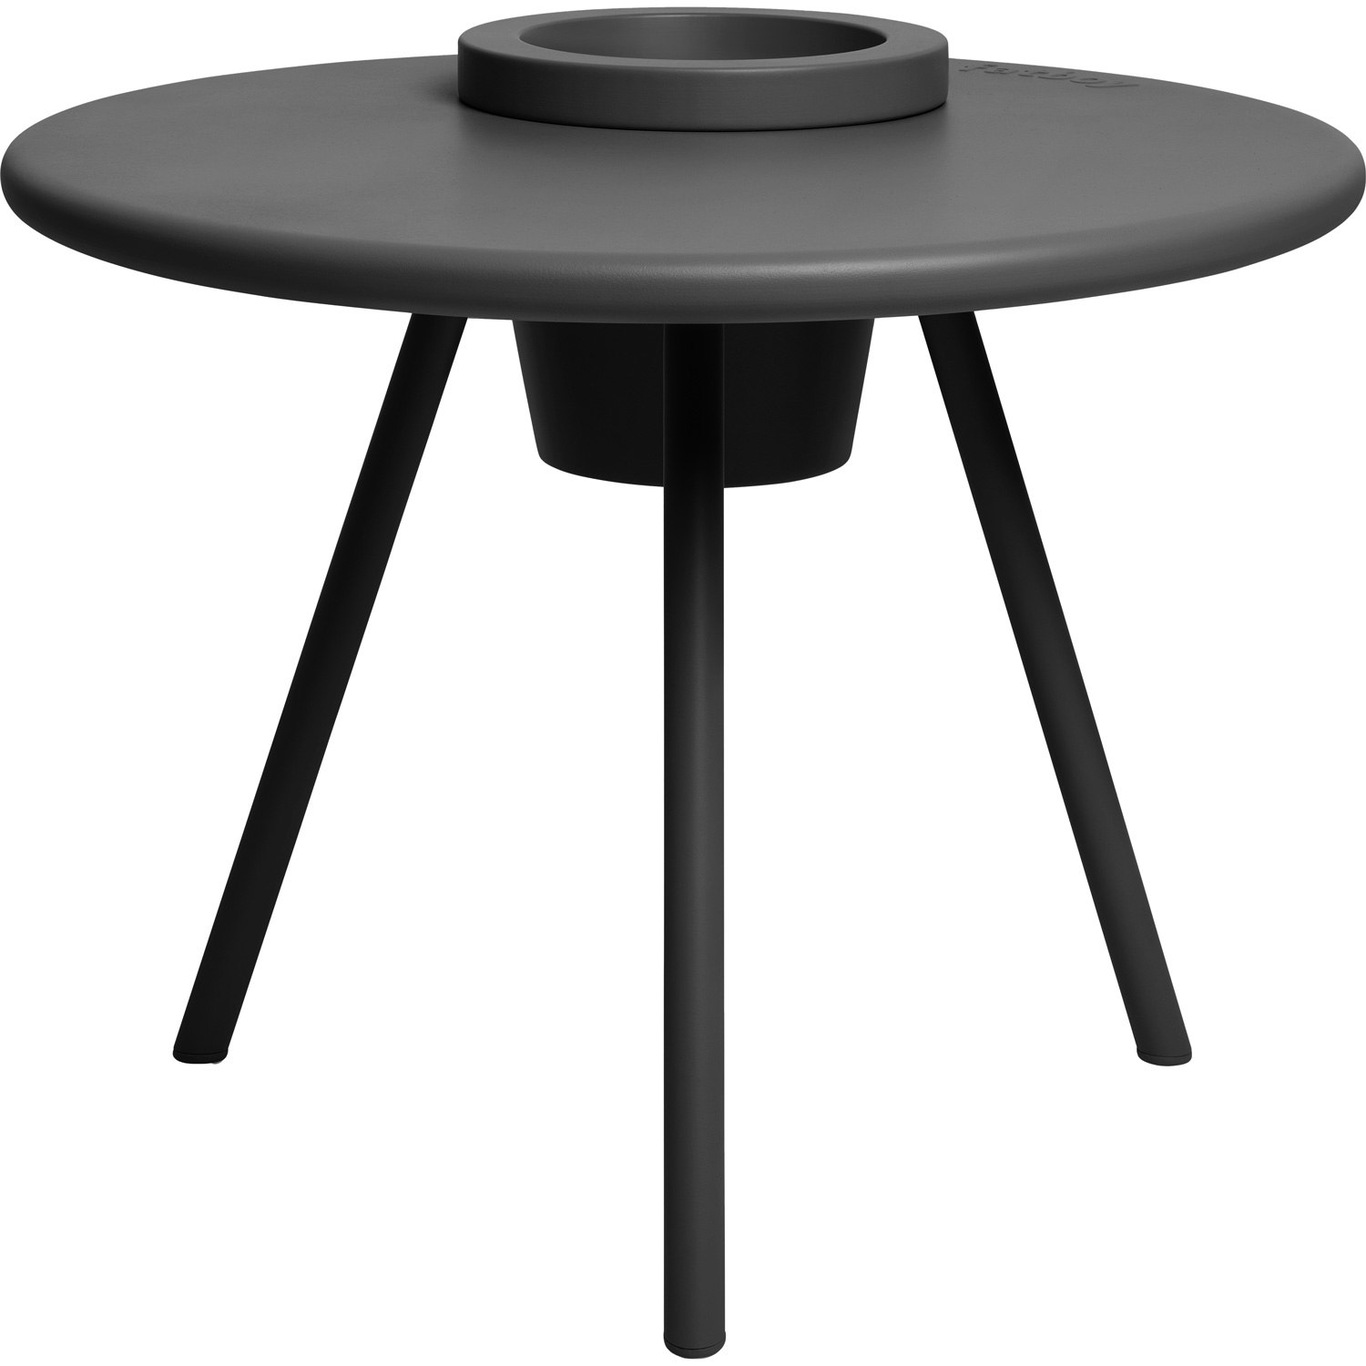 Bakkes table anthracite